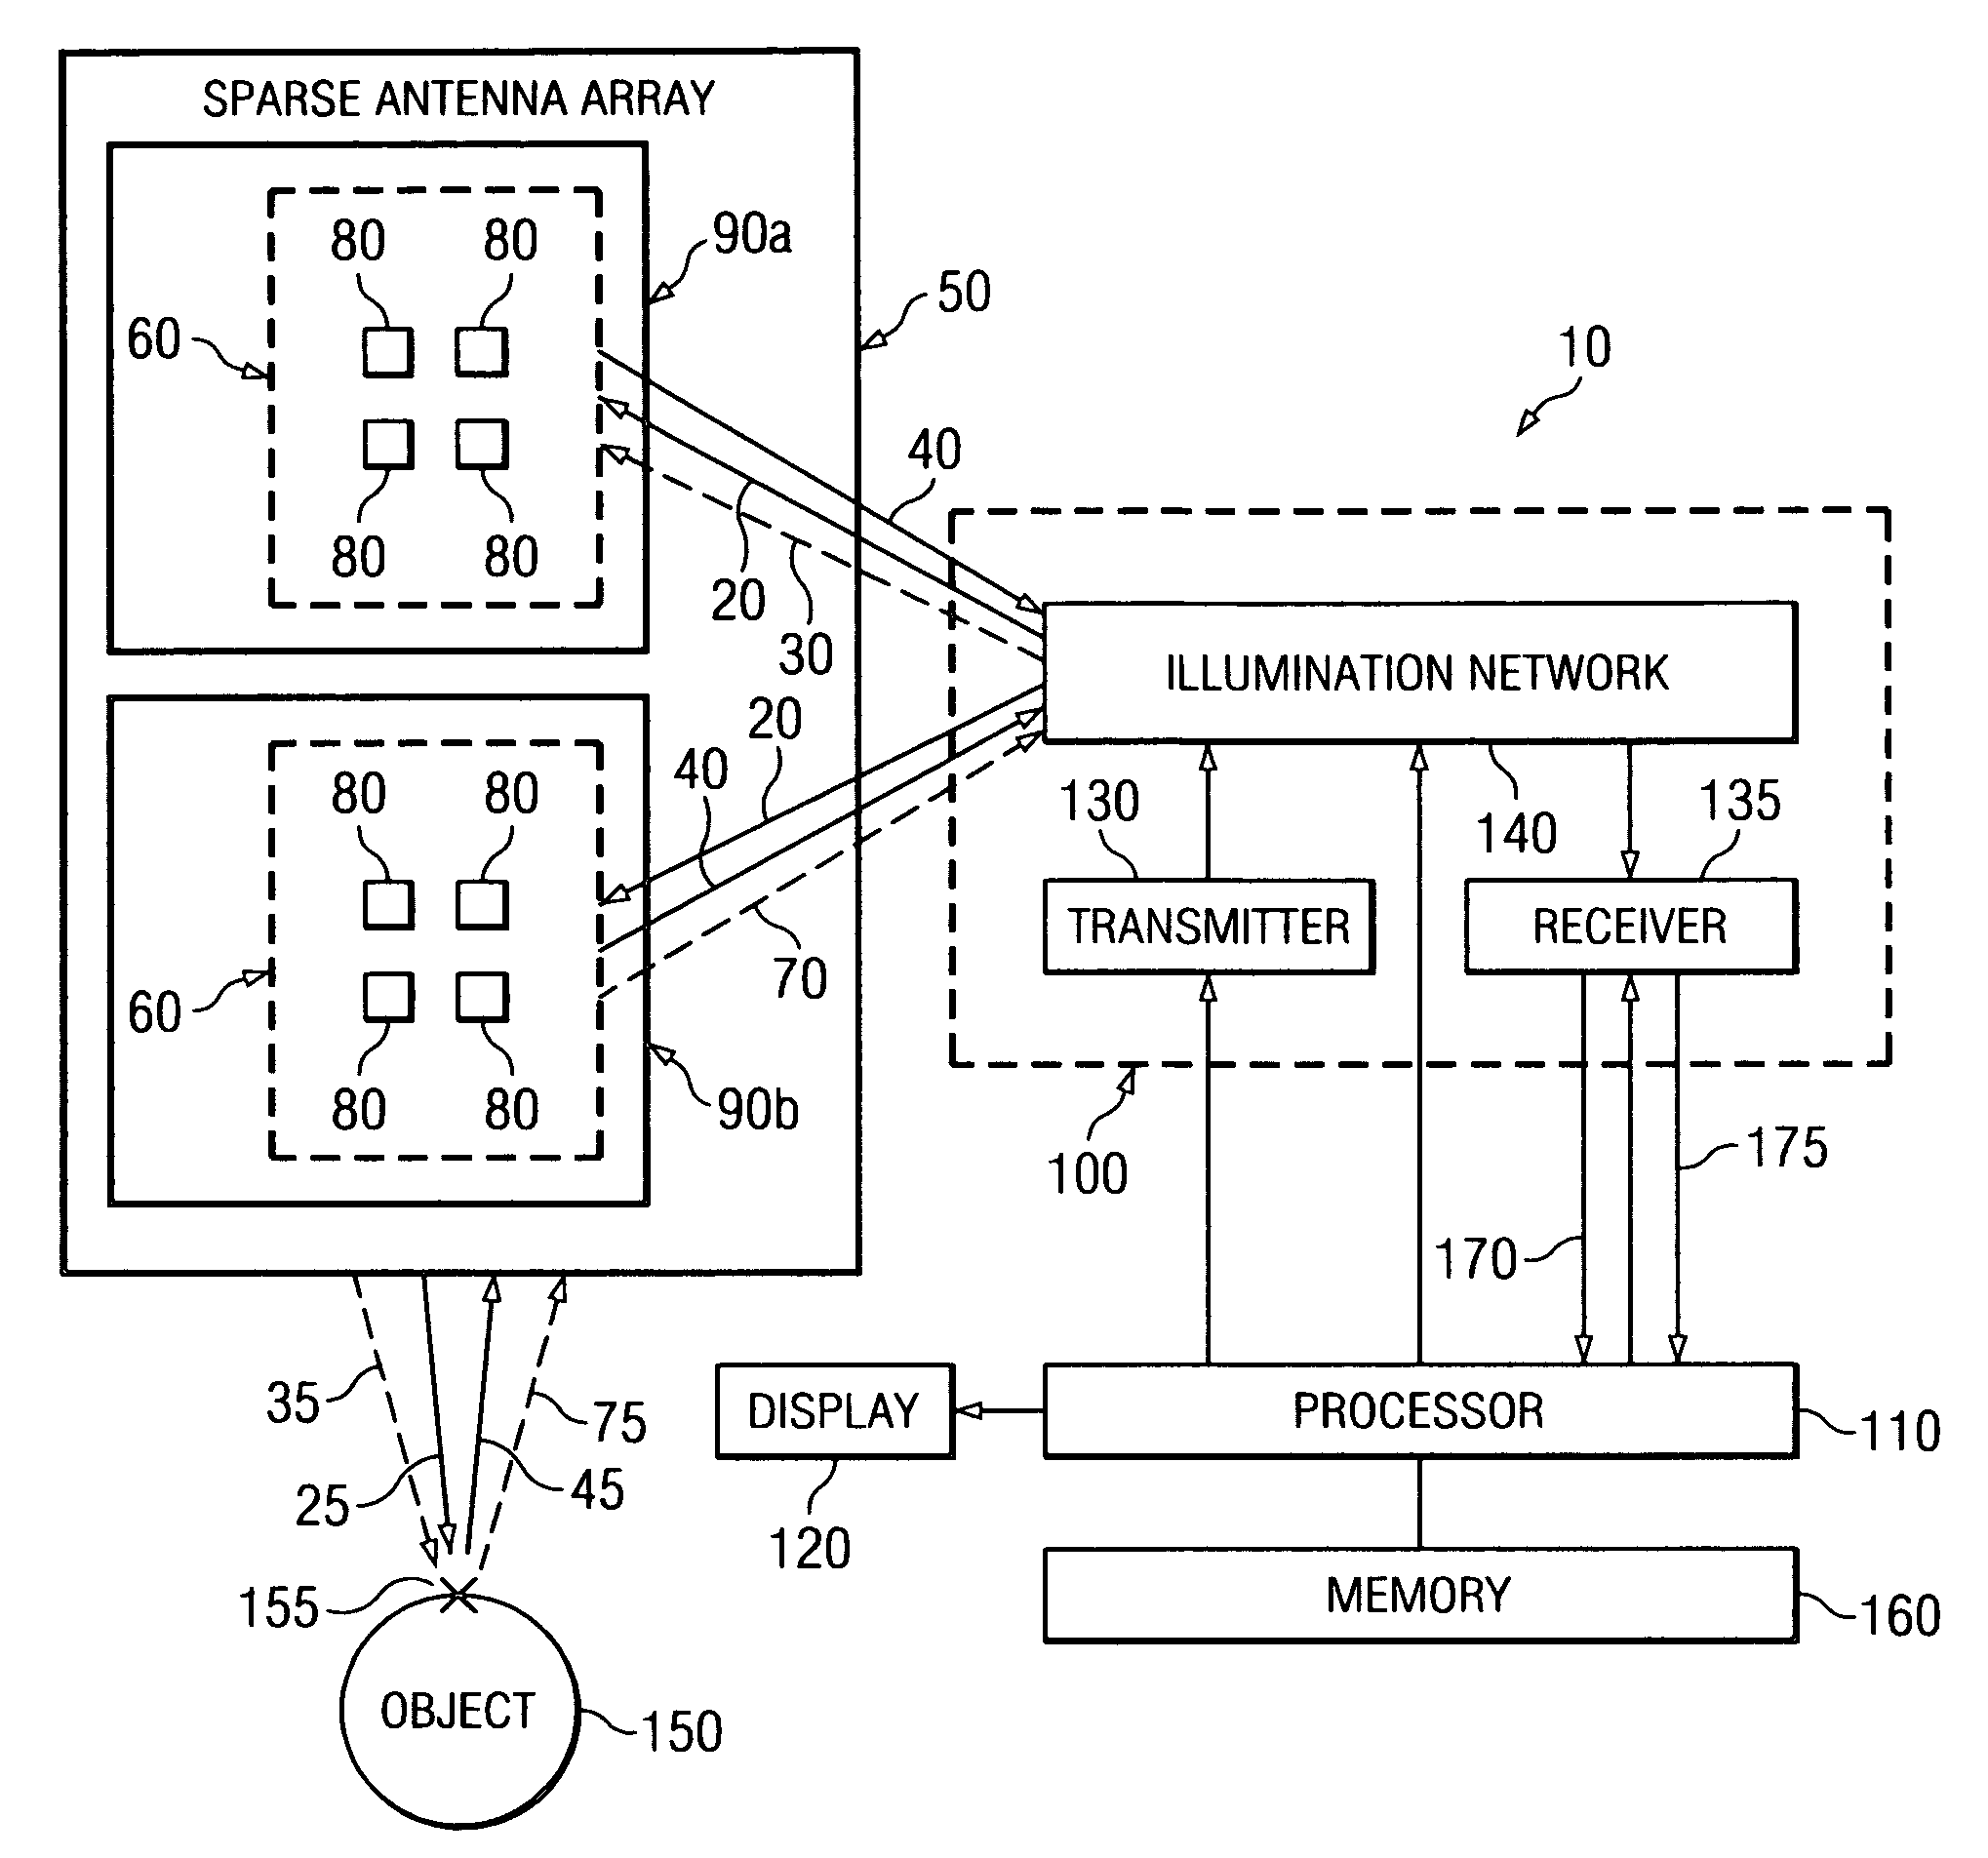 System and method for microwave imaging with suppressed sidelobes using a sparse antenna array